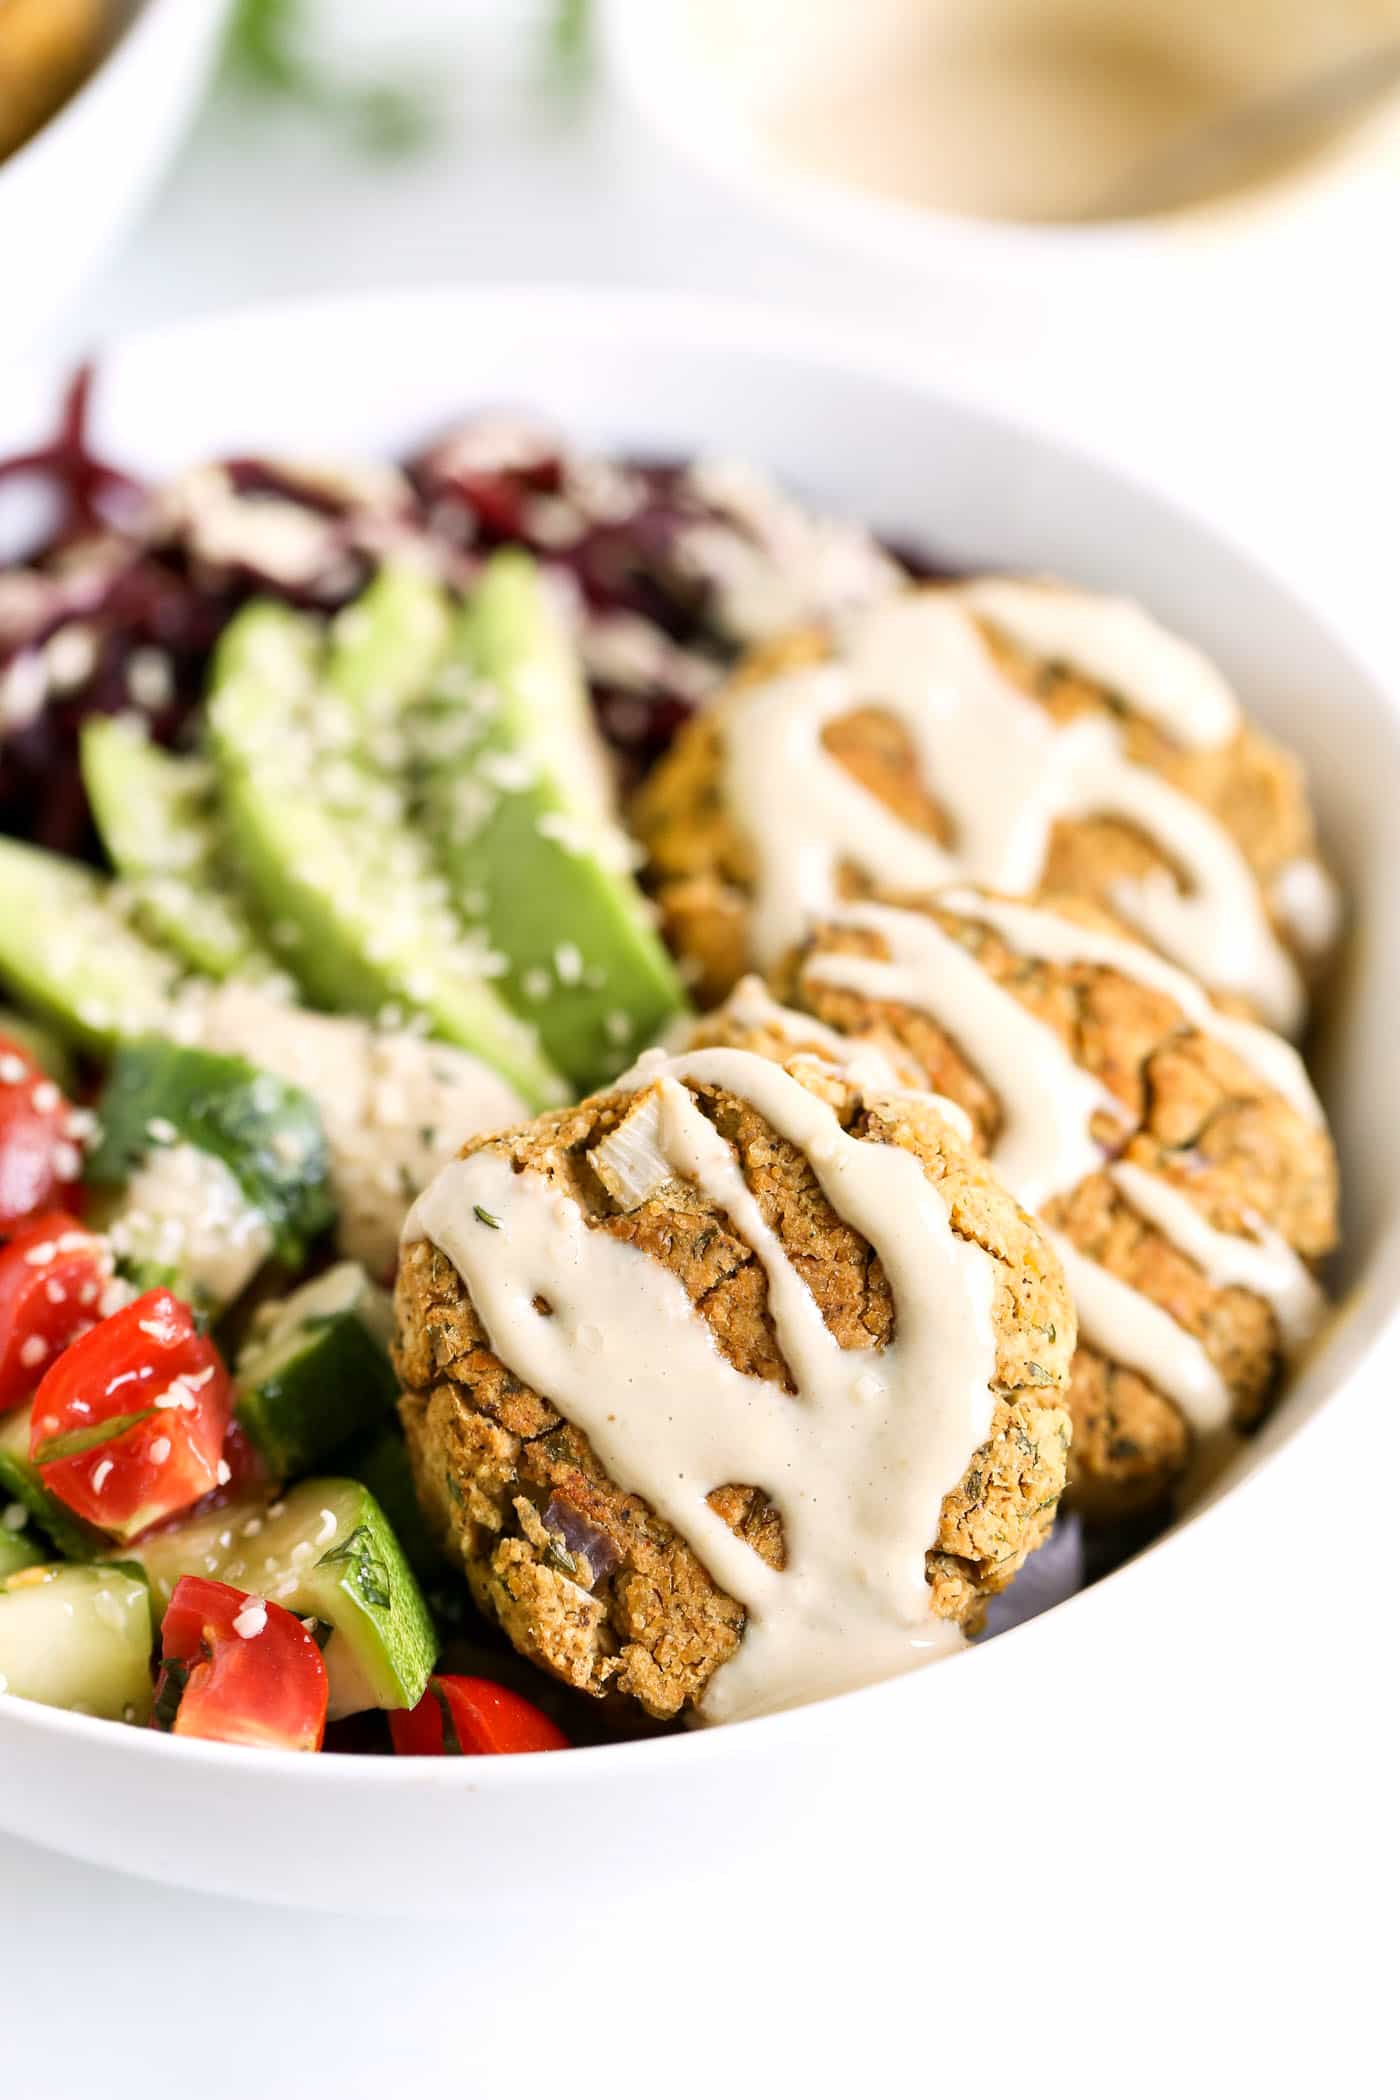 EASY BAKED FALAFEL BOWLS with roasted beet noodles and a creamy tahini dressing [VEGAN]